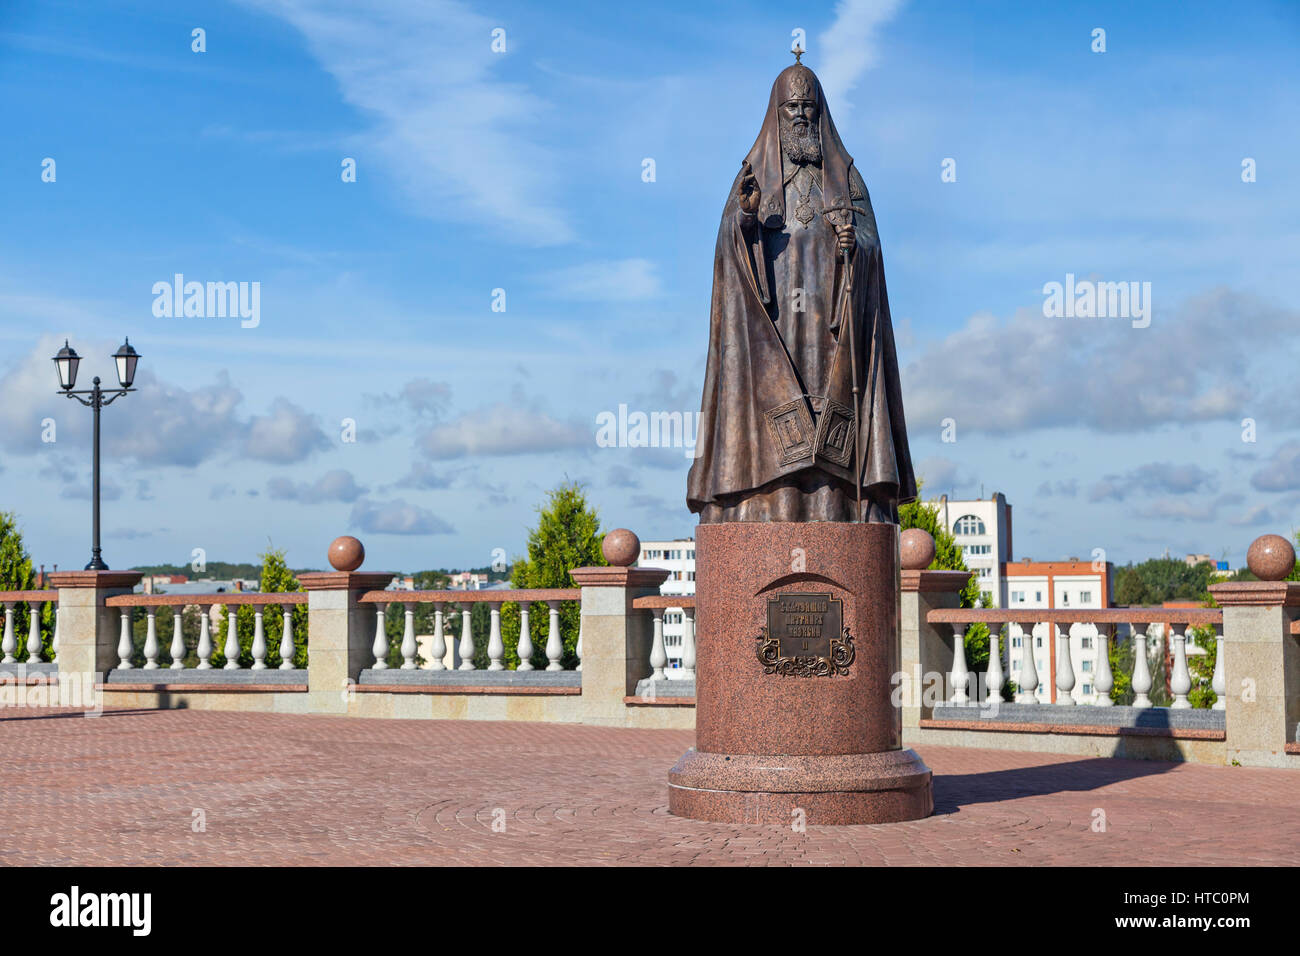 Vitebsk, Belarus - August 04 2016: Monument to Patriarch Alexy II the primate of the Russian Orthodox Church made in 2013 by sculptor Vladimir Slobodc Stock Photo